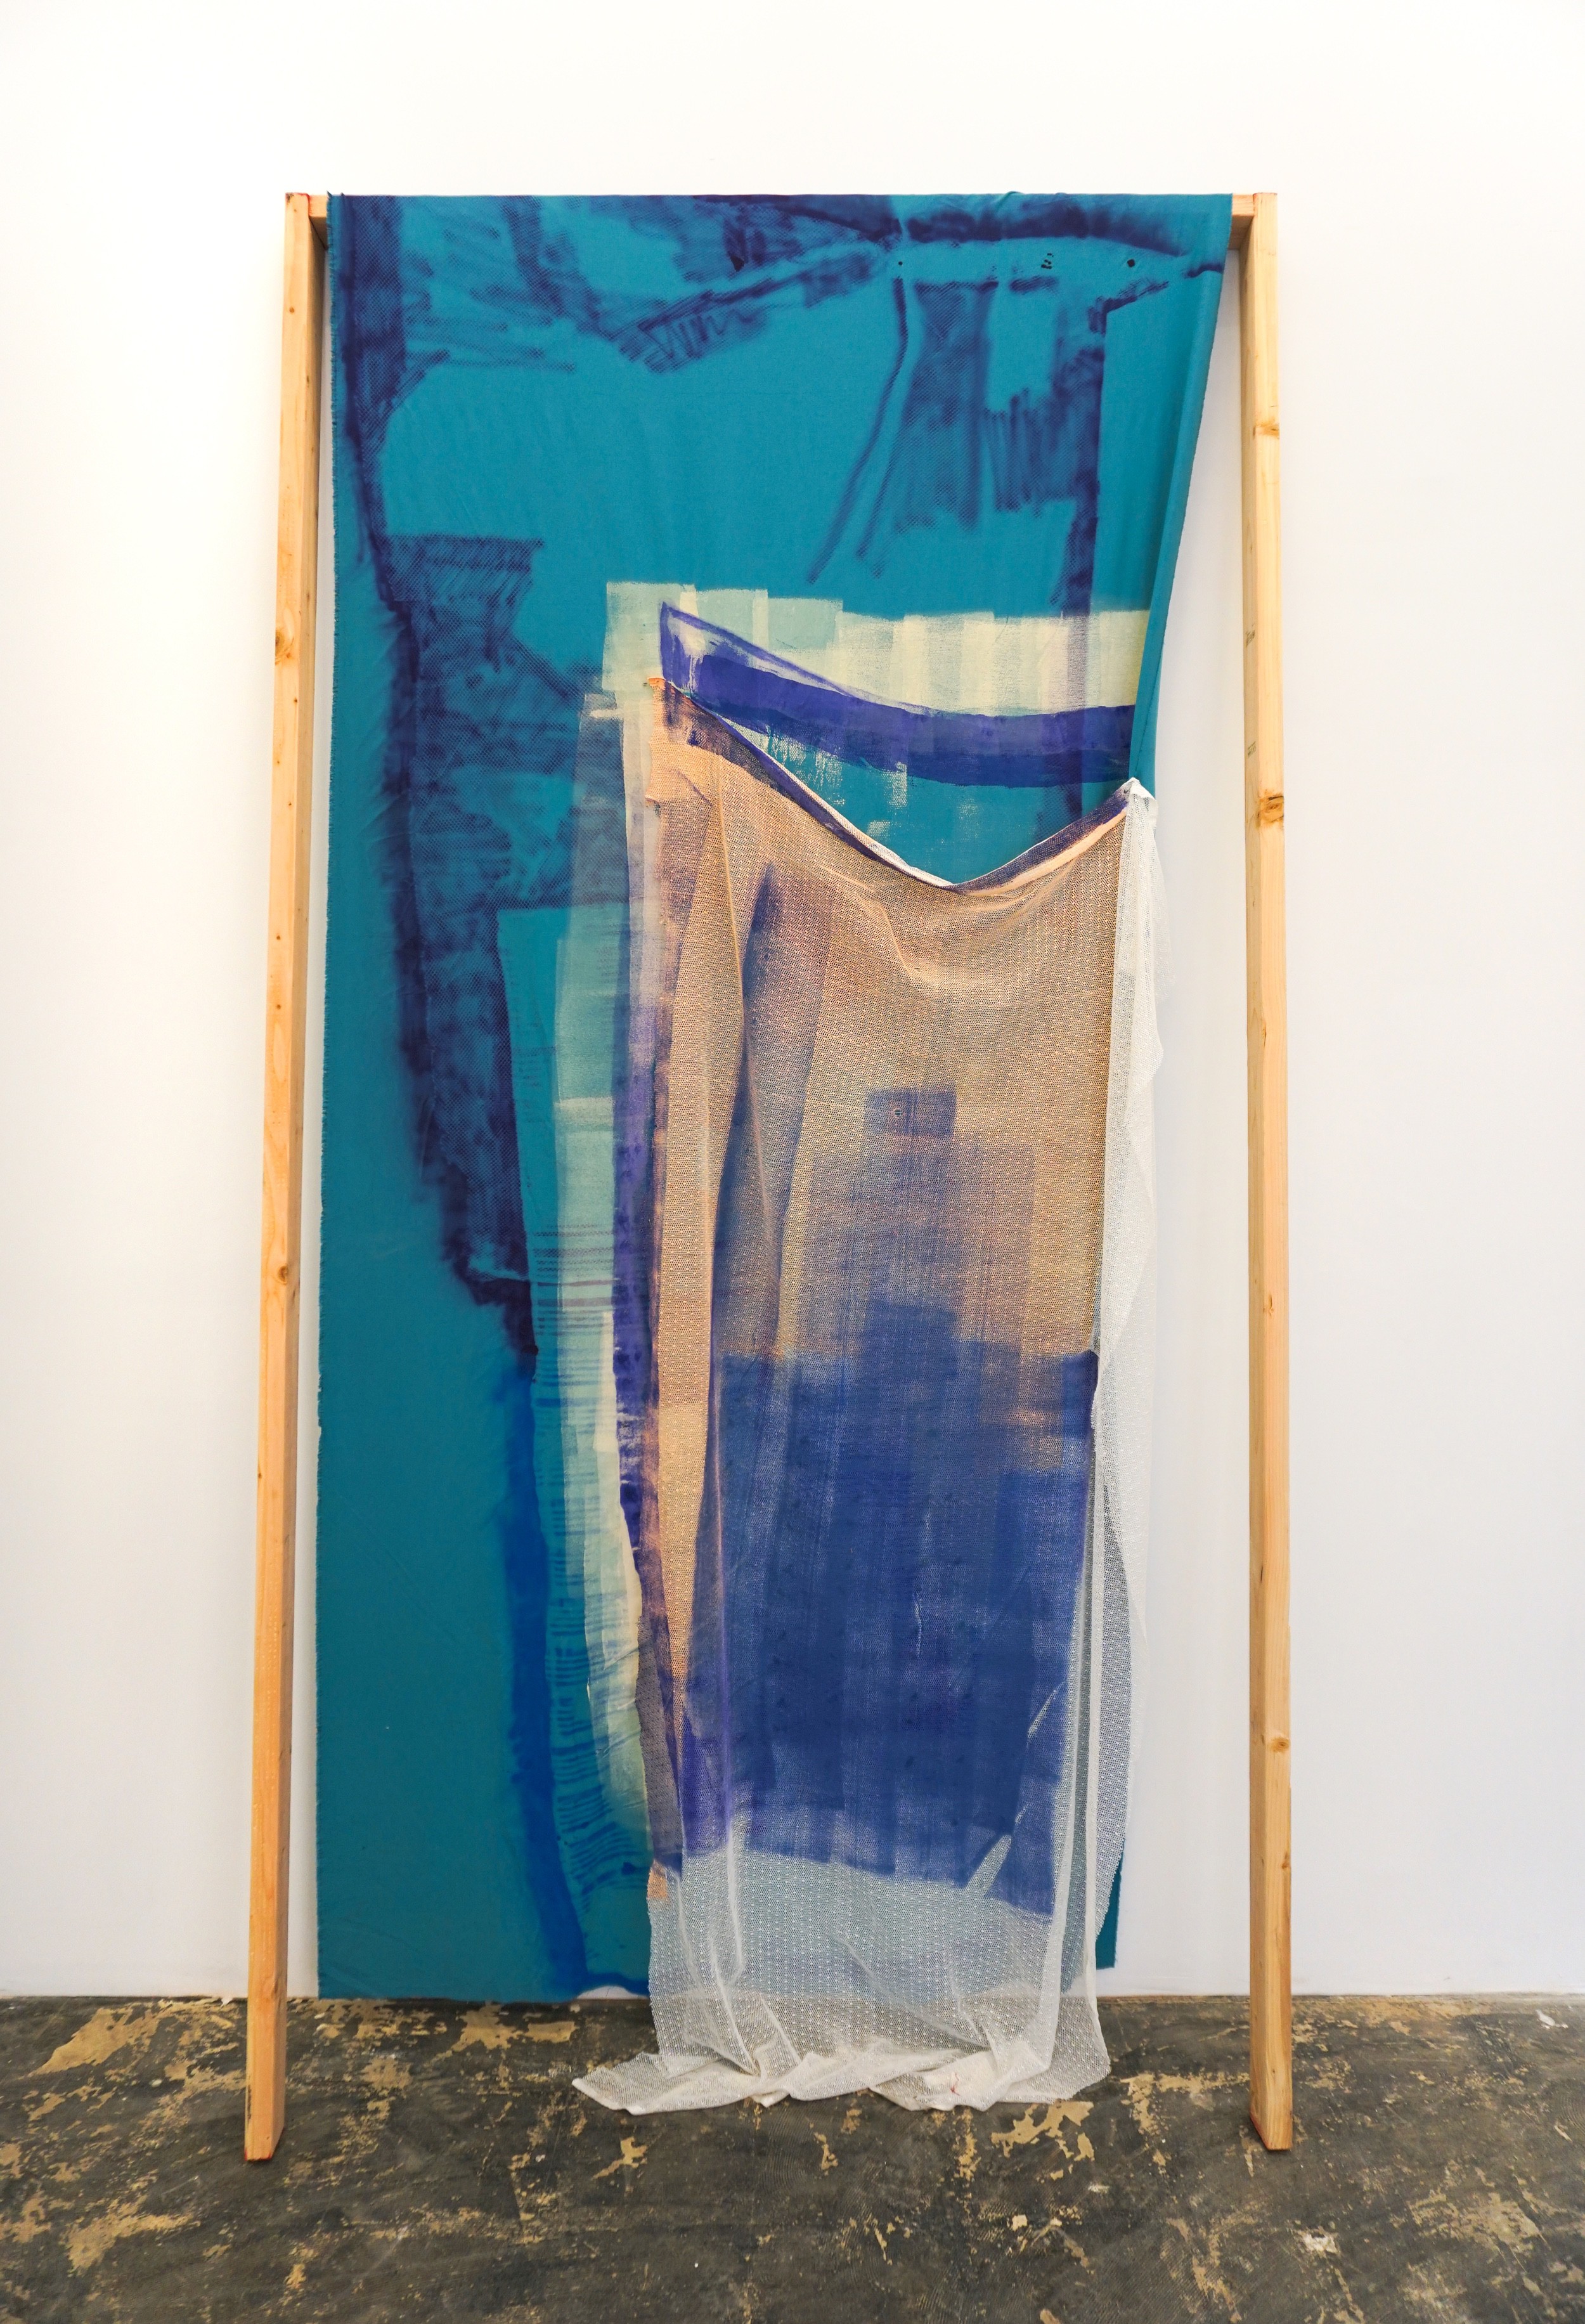  Cybele Lyle  The Desert in Four Parts (3) , 2018 Fabric, paint, wood 10 x 5 feet 